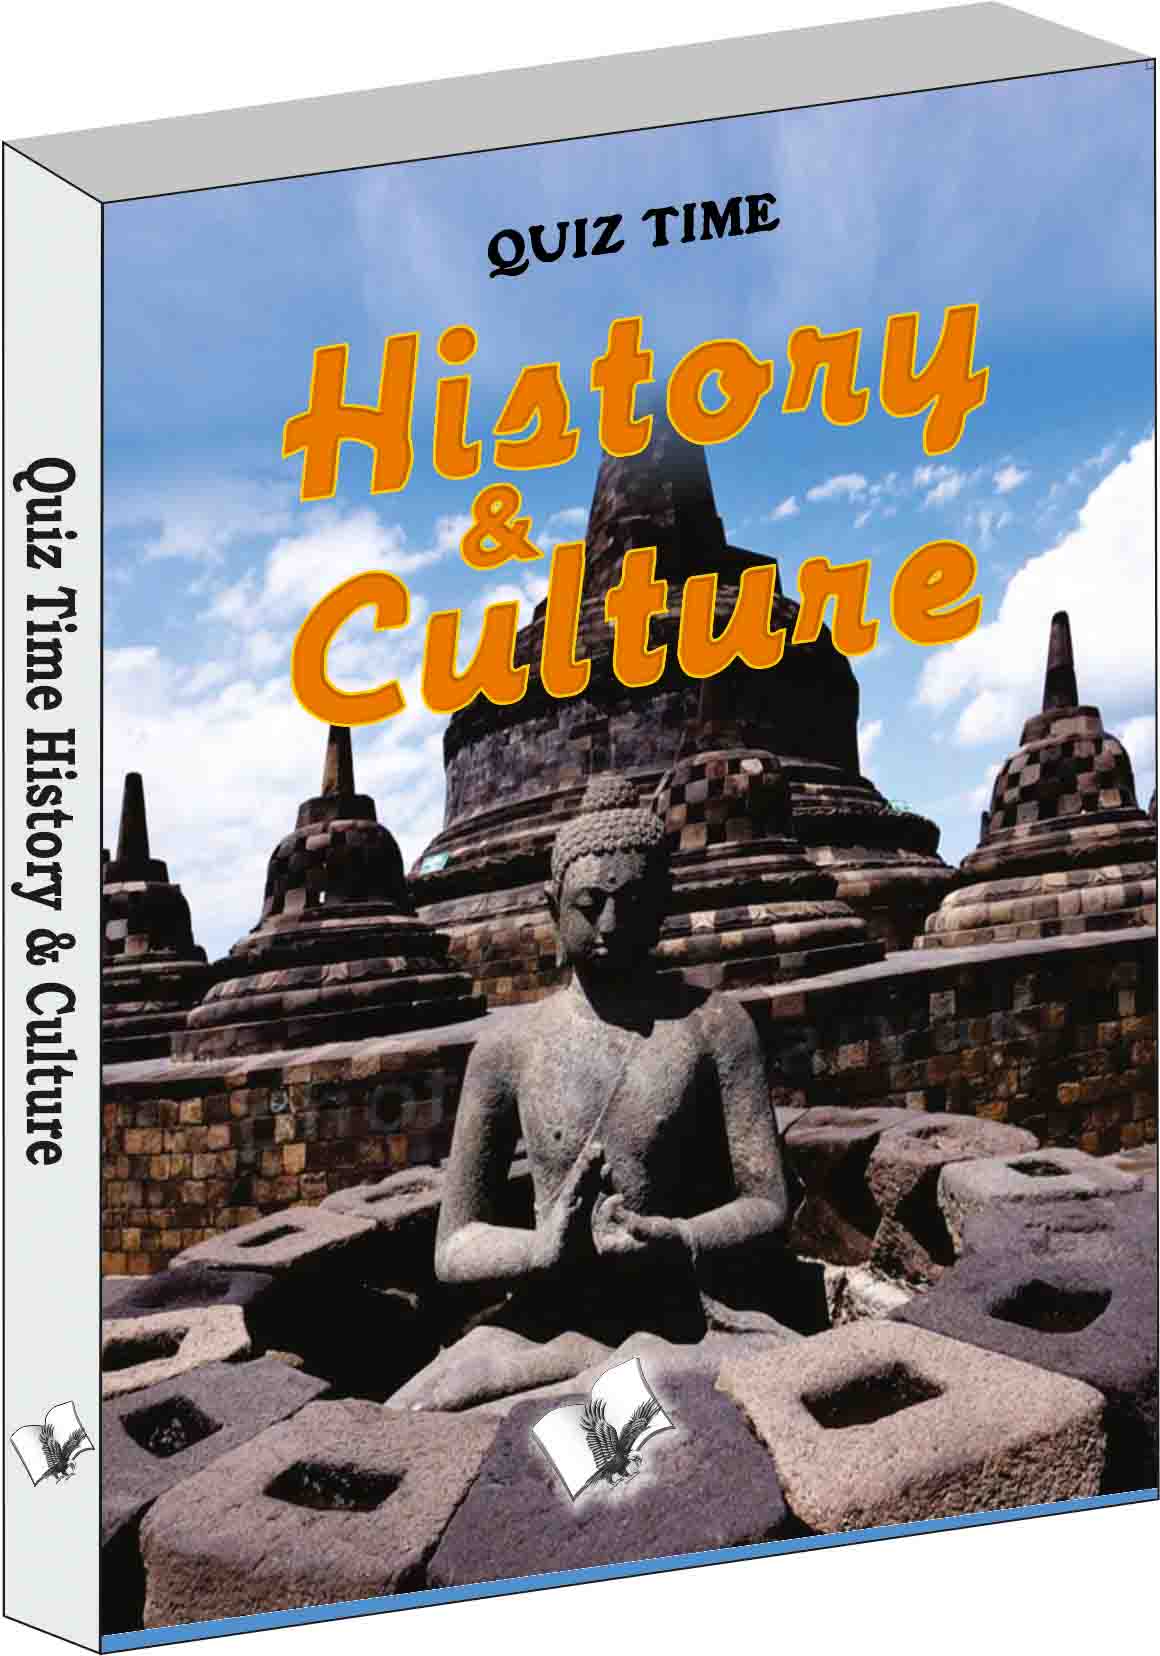 Quiz Time History & Culture-Best bet for knowledge and entertainment